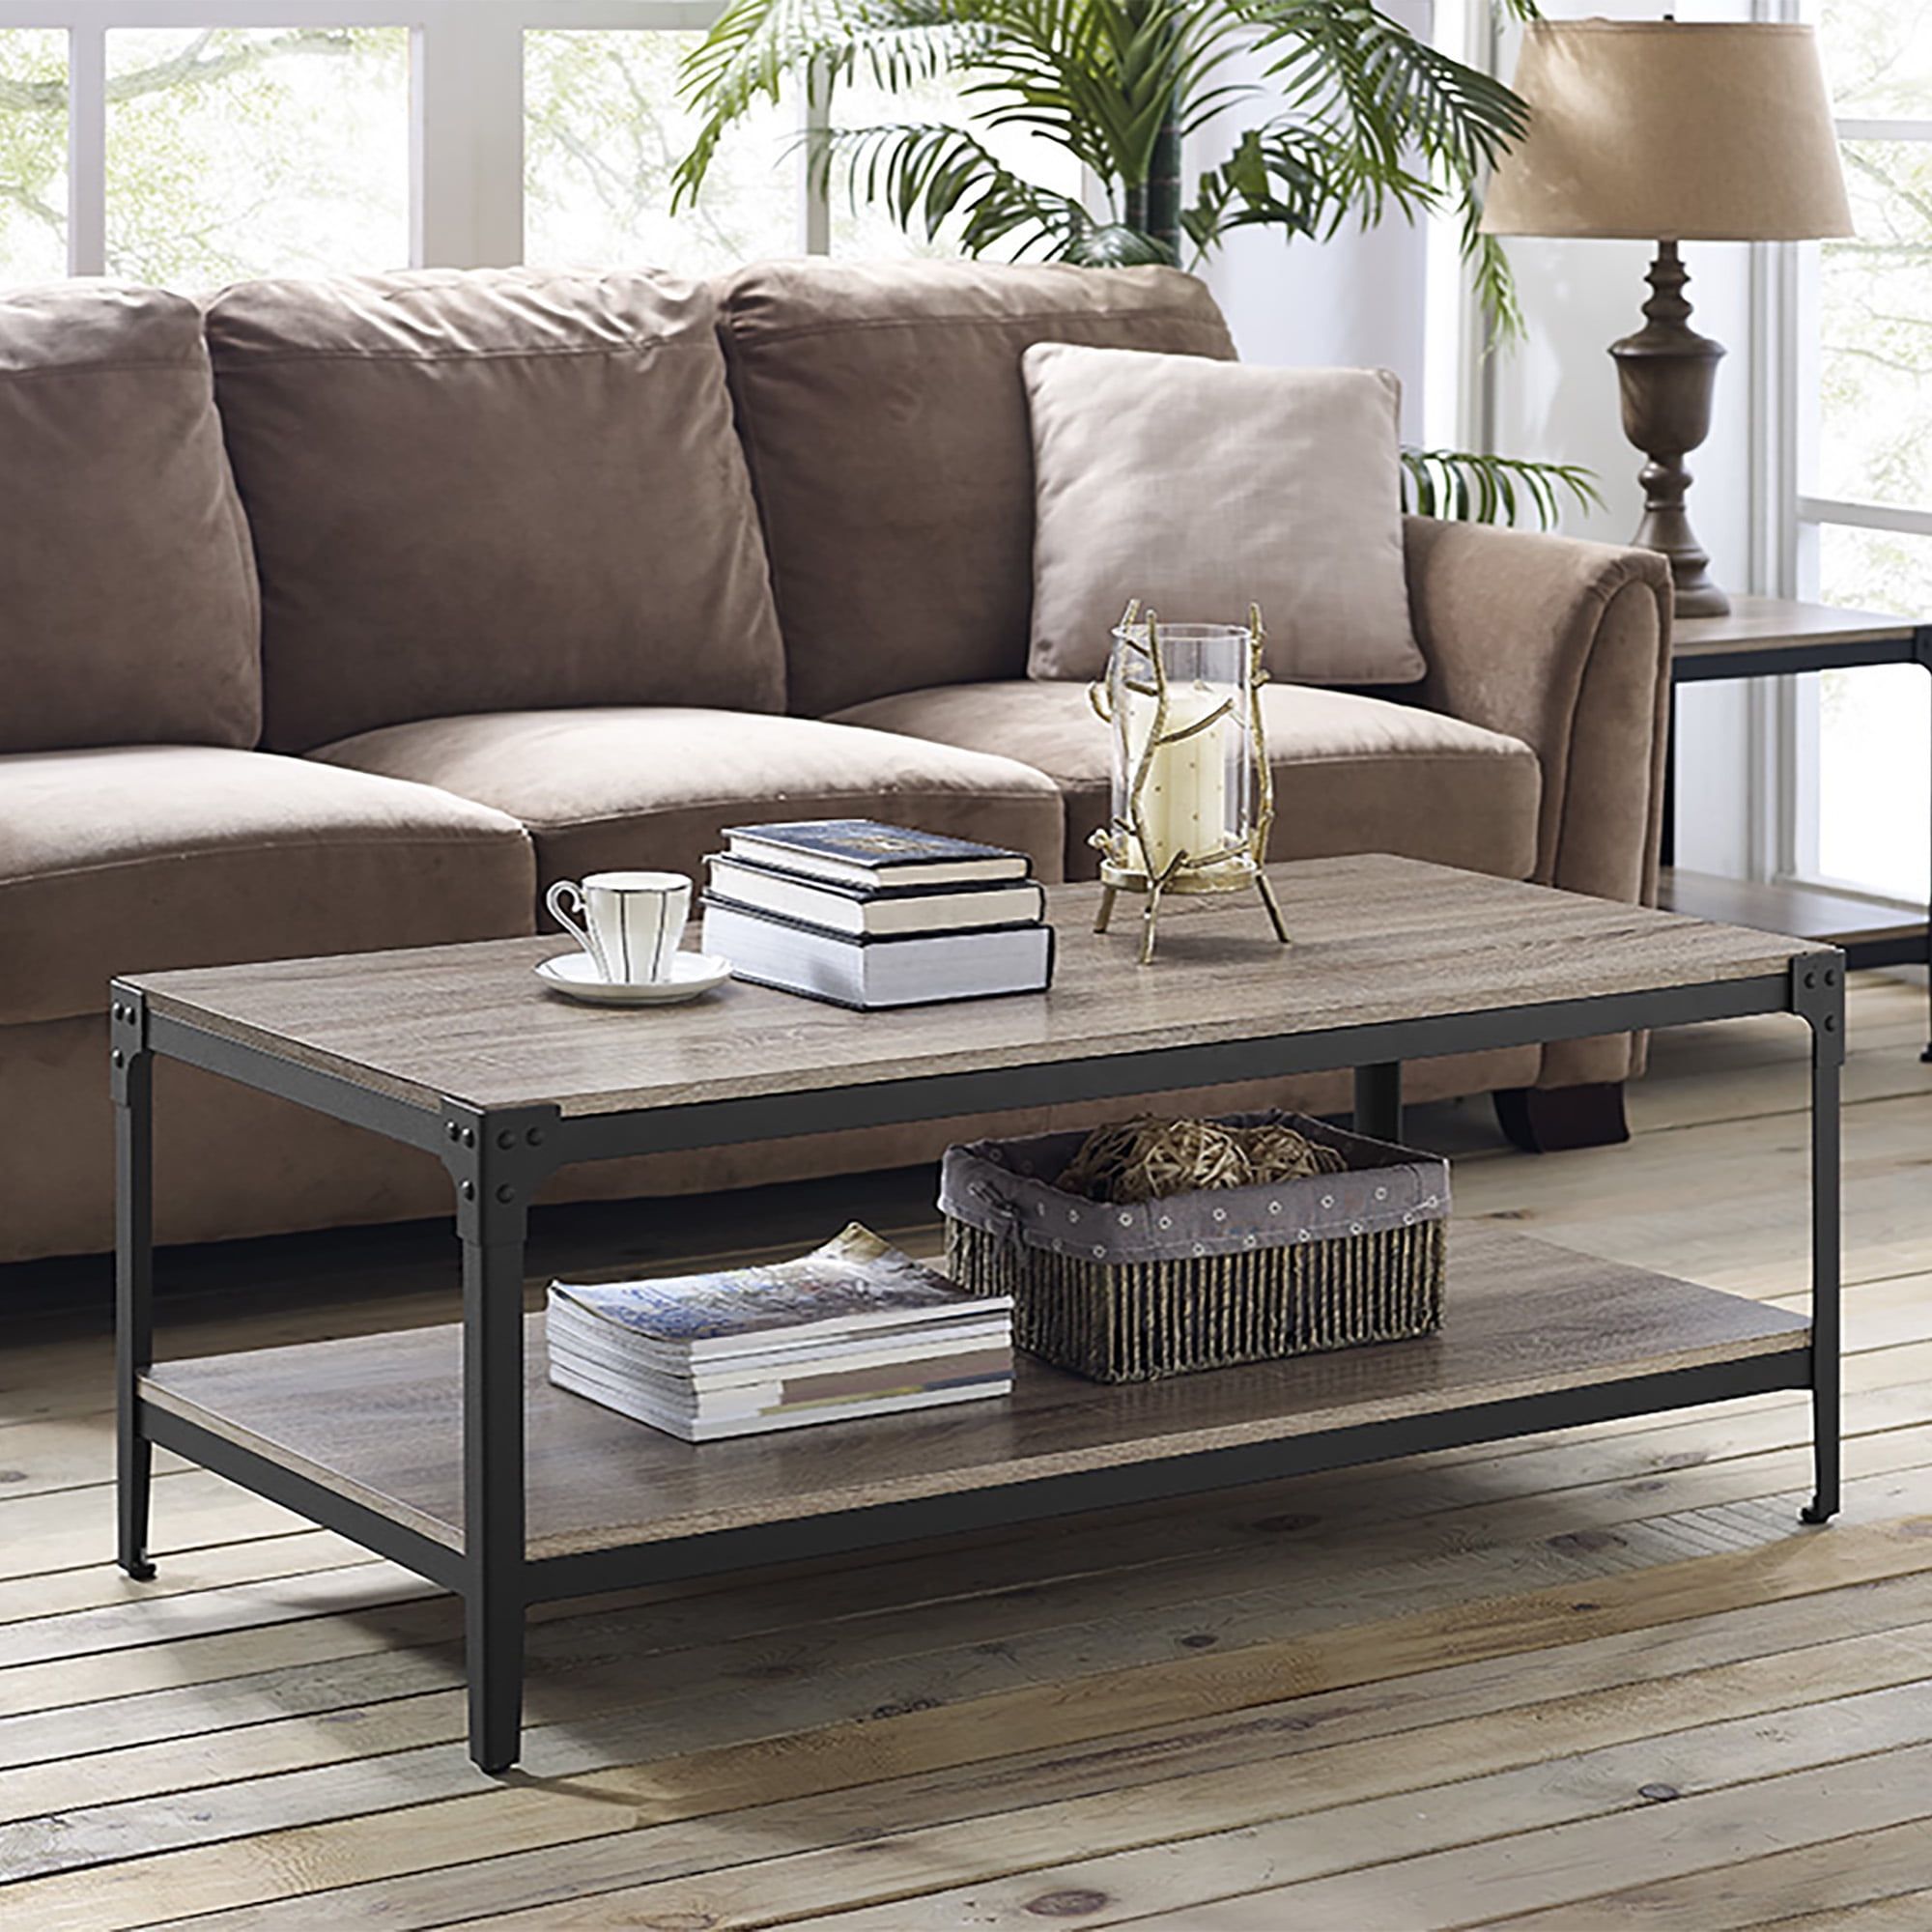 Woven Paths Wilson Angle Iron Rustic Coffee Table, Driftwood – Walmart With Woven Paths Coffee Tables (View 14 of 15)